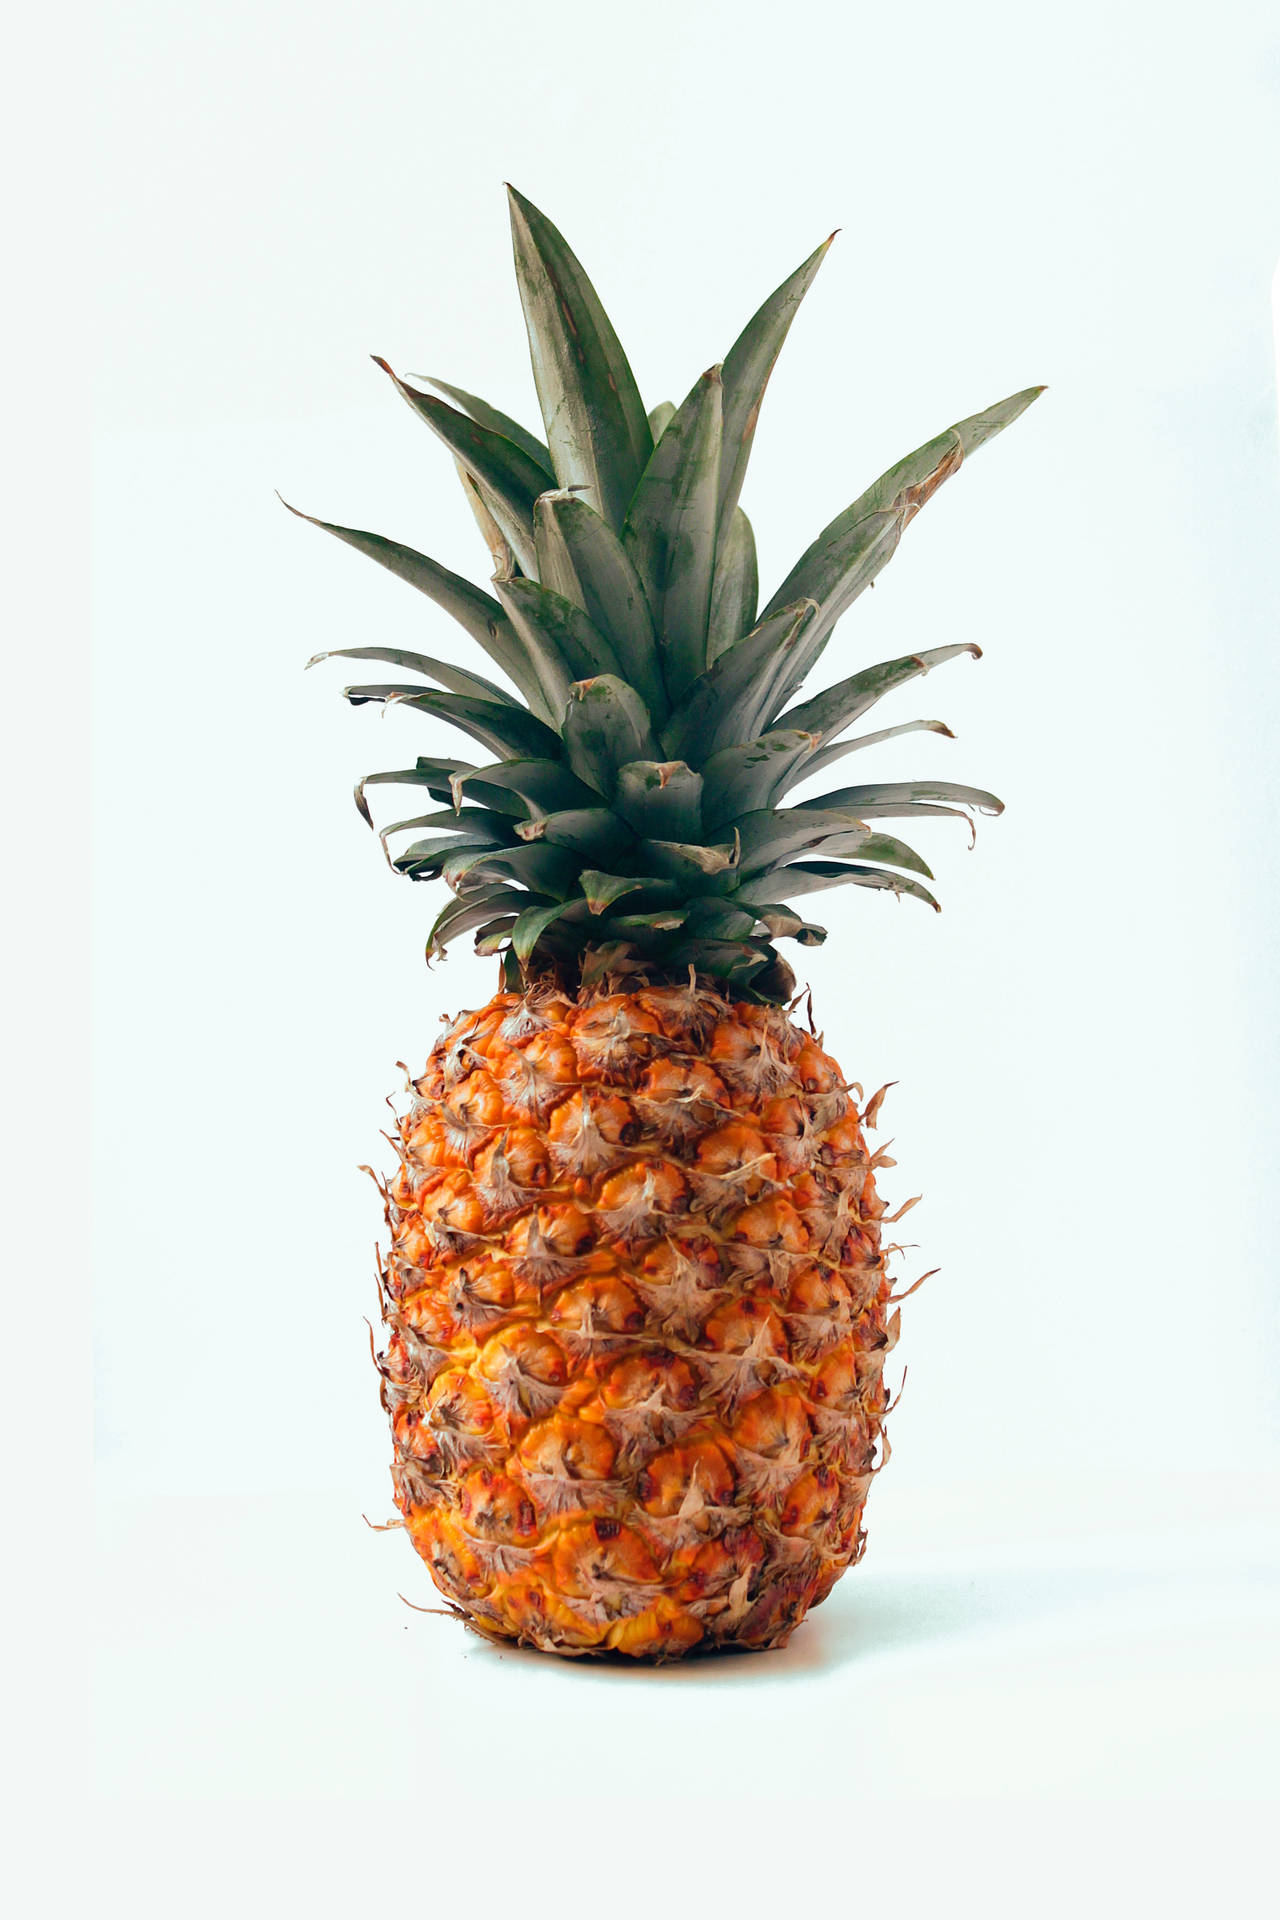 2749X4124 Pineapple Wallpaper and Background